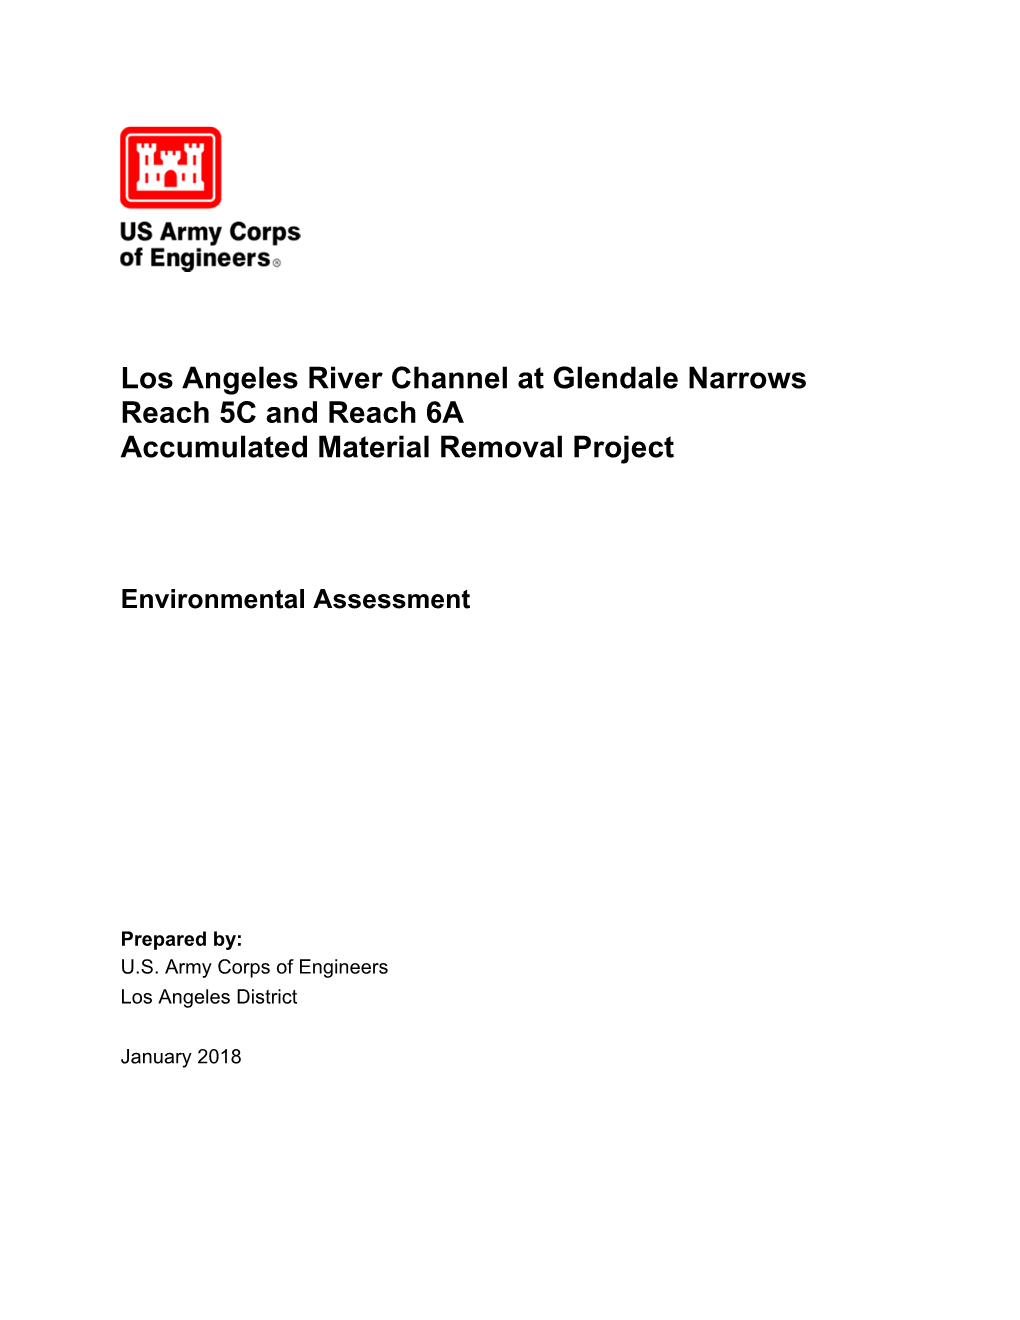 Los Angeles River Channel at Glendale Narrows Reach 5C and Reach 6A Accumulated Material Removal Project